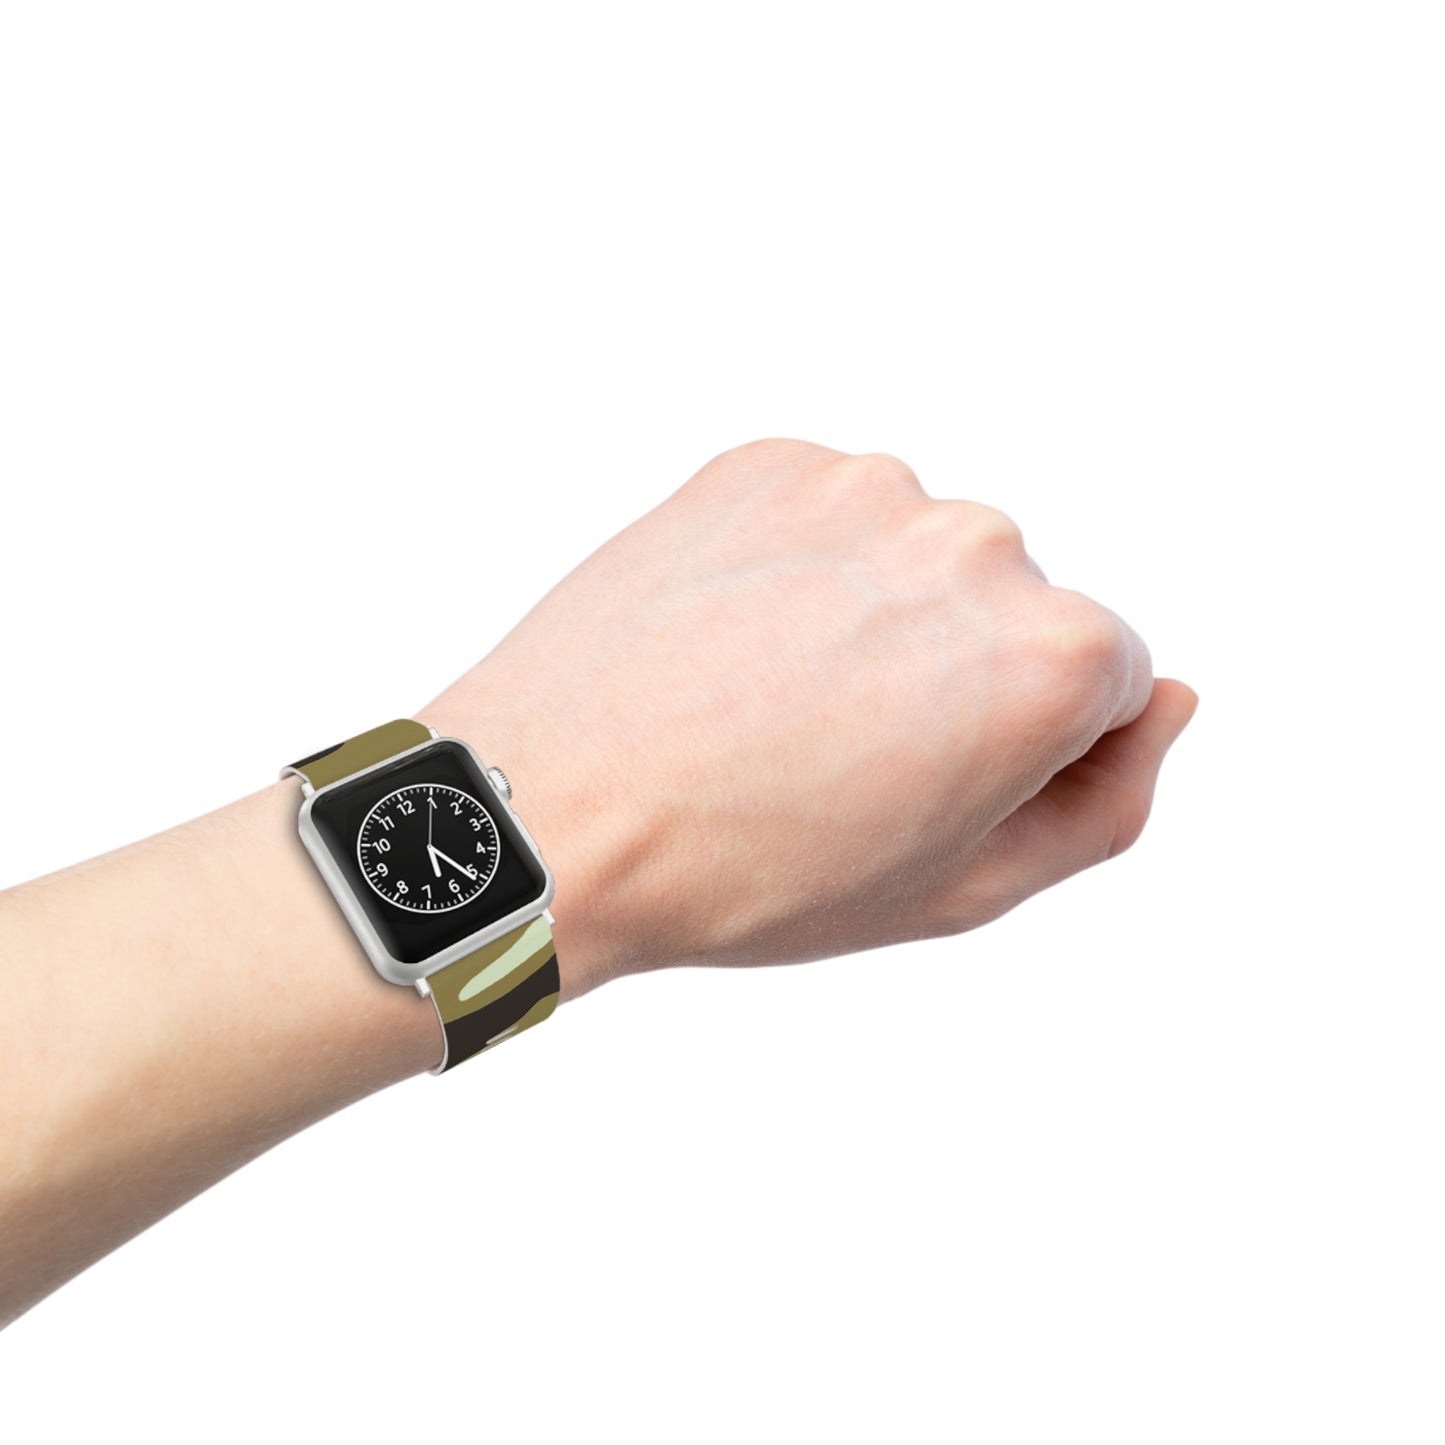 Gus Harland - Camouflage Apple Wrist Watch Band